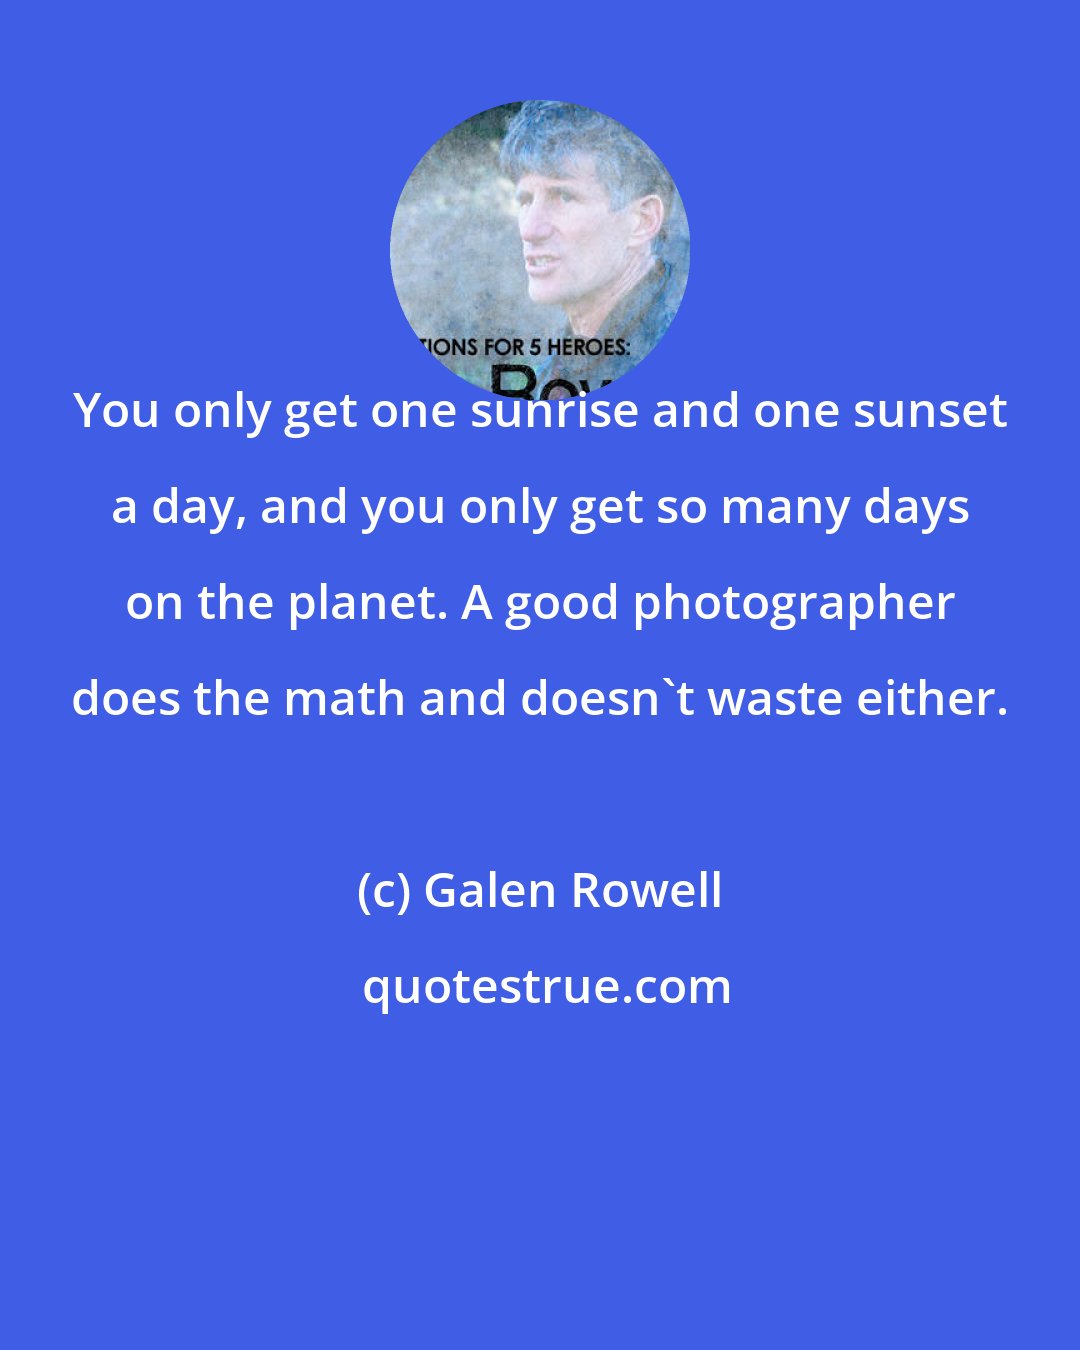 Galen Rowell: You only get one sunrise and one sunset a day, and you only get so many days on the planet. A good photographer does the math and doesn't waste either.